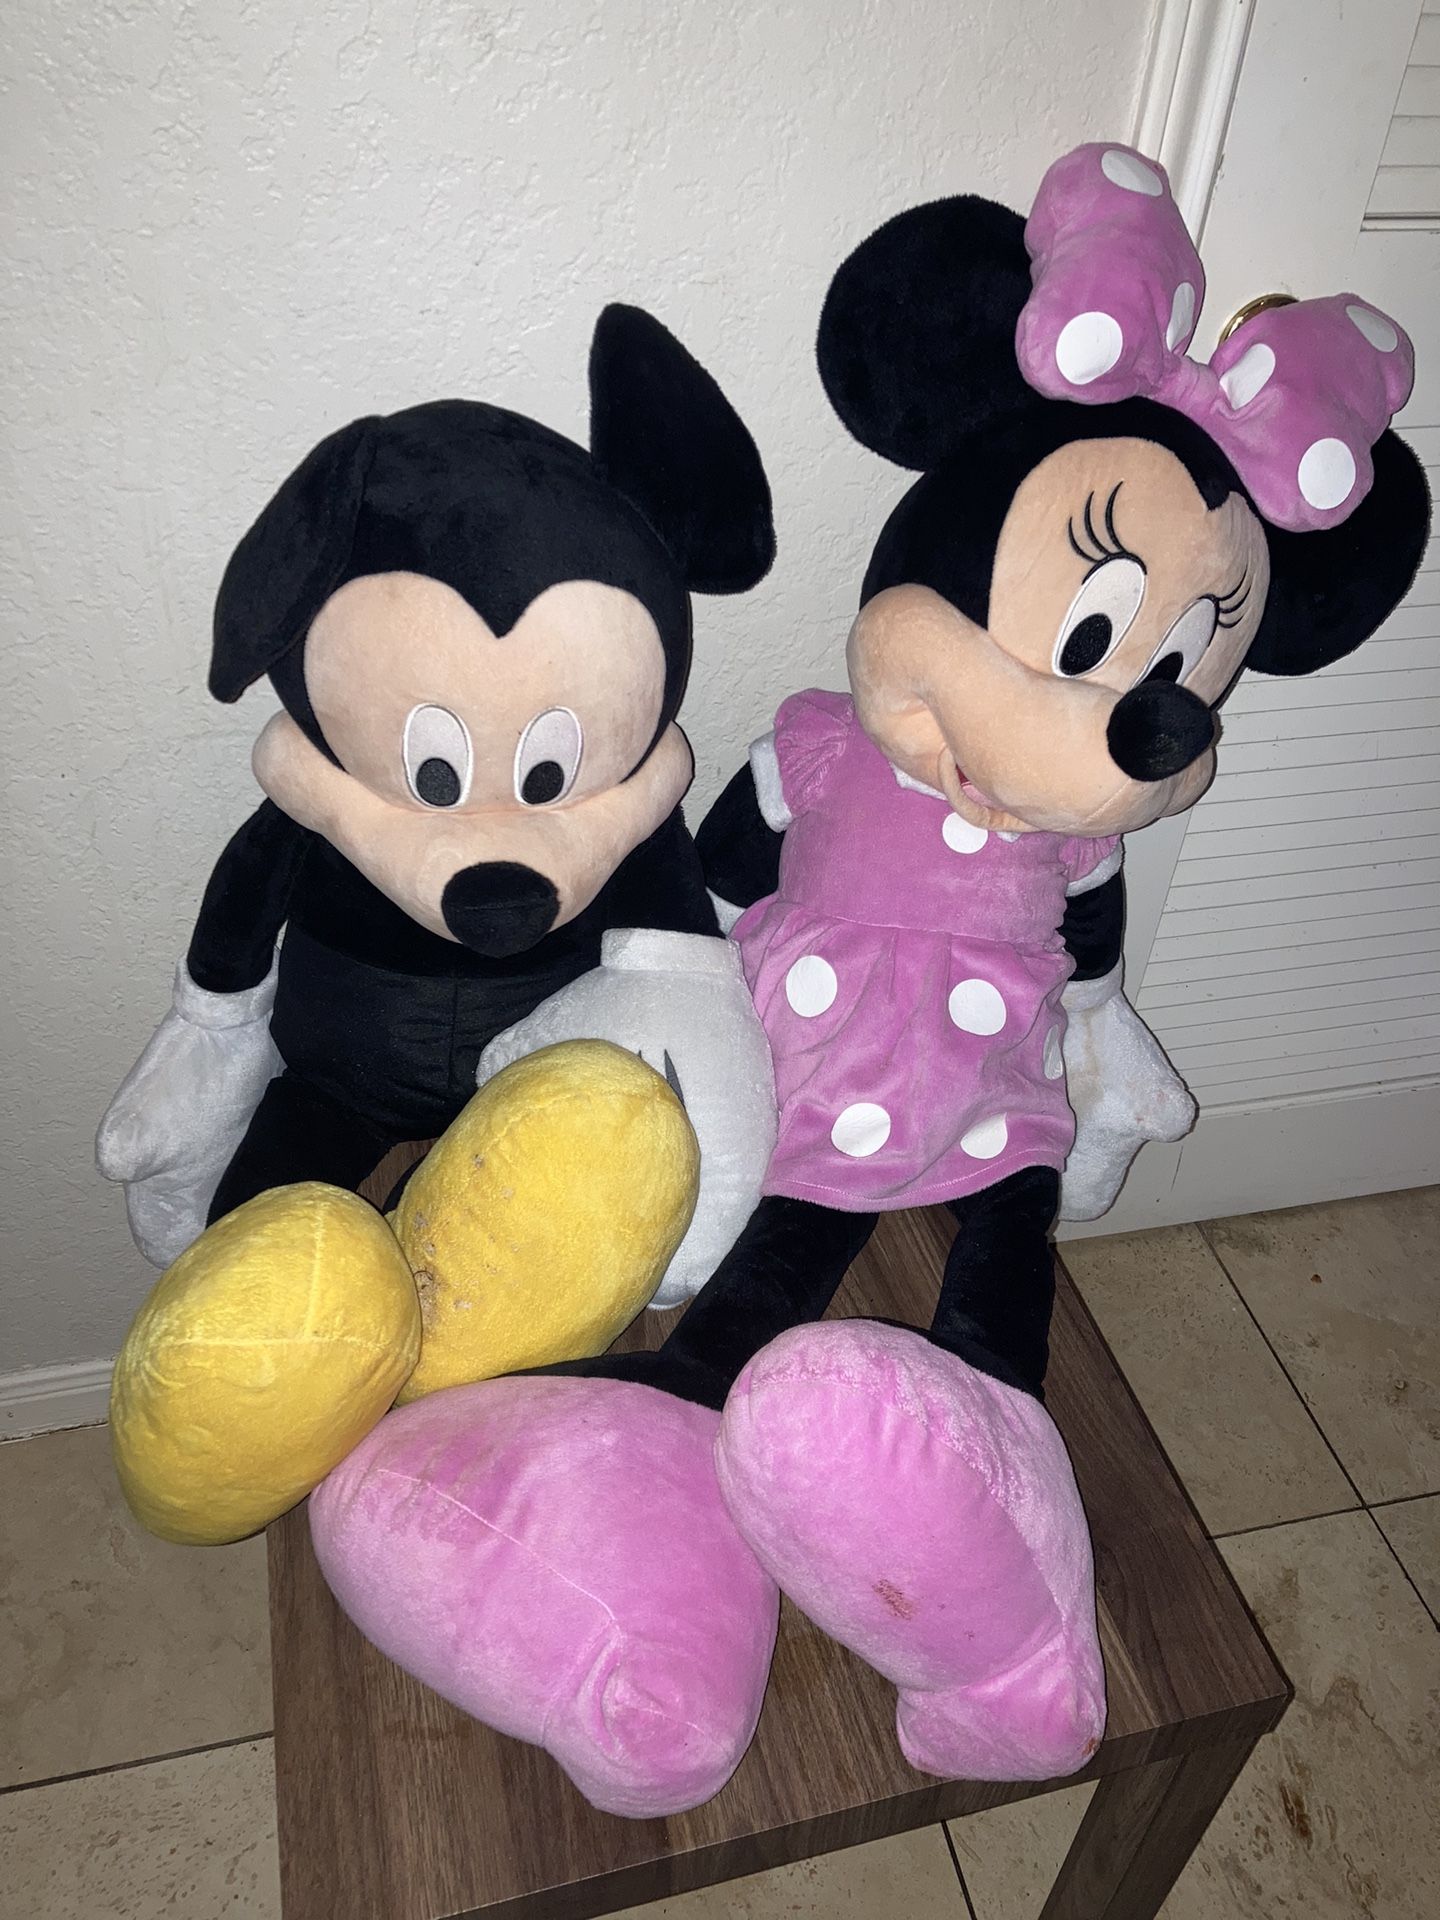 Mikey & Miney Mouse 